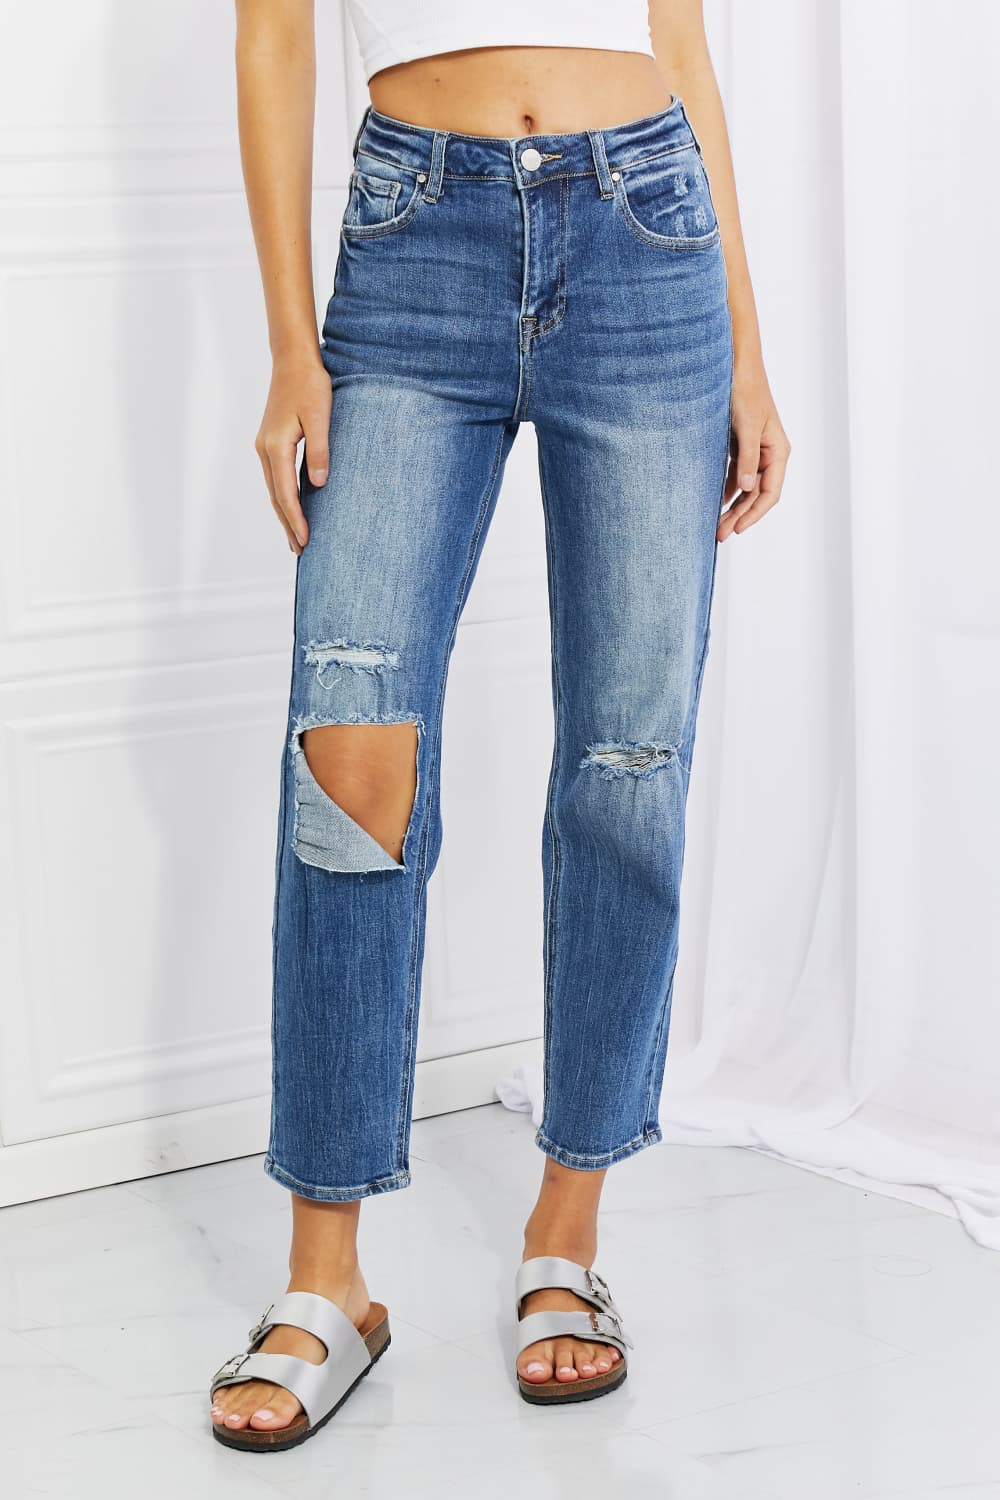 High Rise Relaxed Jeans - Tigbul's Fashion